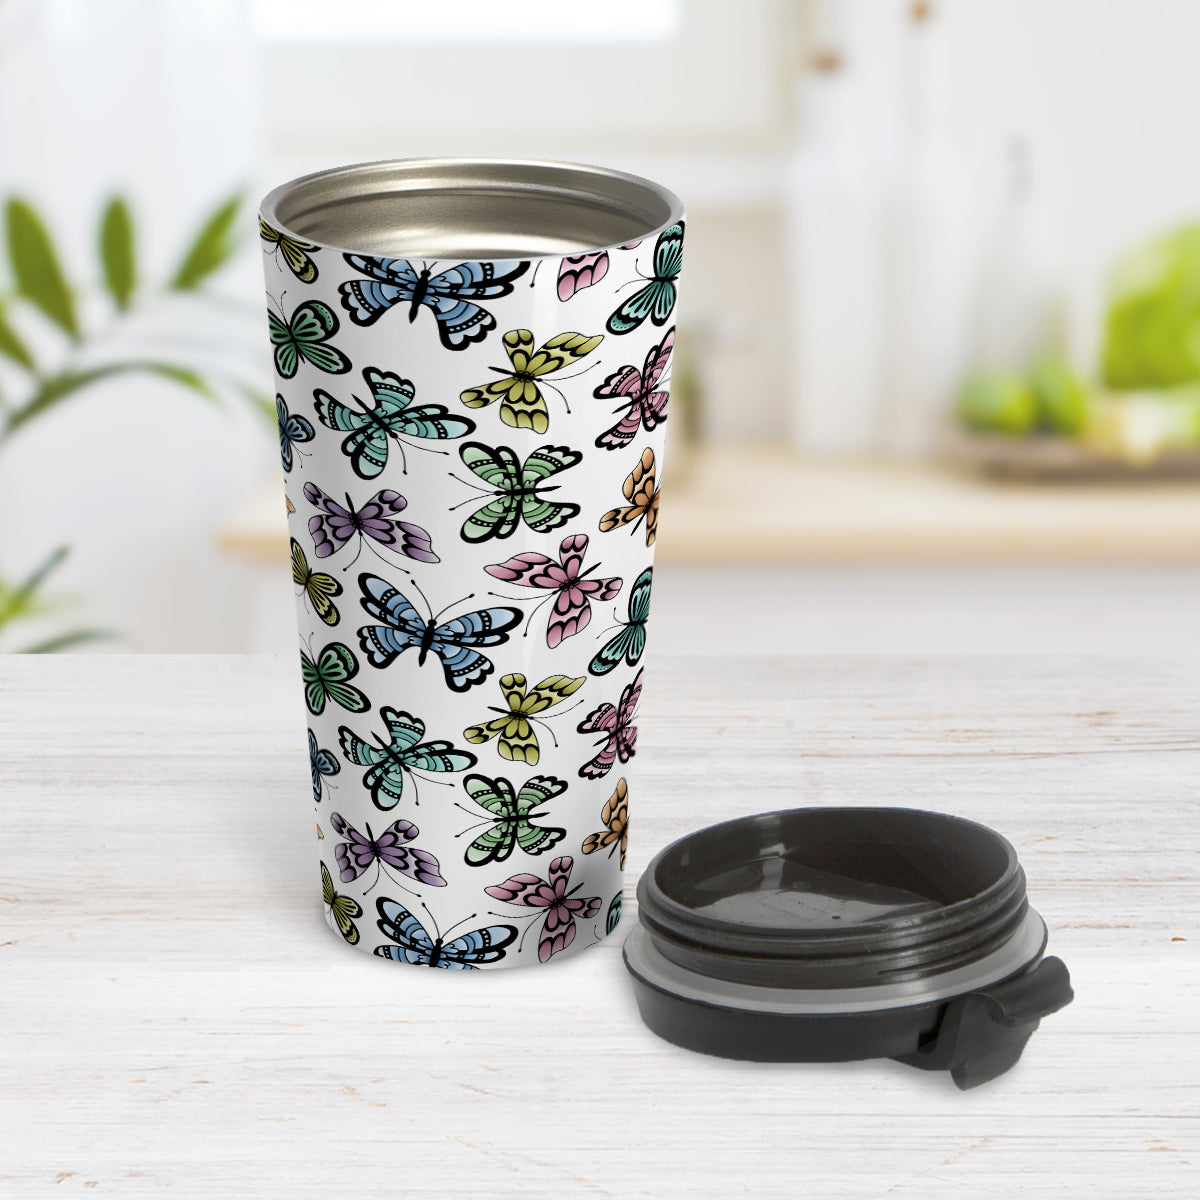 Pretty Butterfly Pattern Travel Mug (15oz) at Amy's Coffee Mugs. A stainless steel travel mug designed with pretty and colorful butterflies in a pattern that wraps around the mug. This travel mug is perfect for people who love butterflies and colorful nature designs. Photo shows the tapered mug with the lid off, beside it on the table.